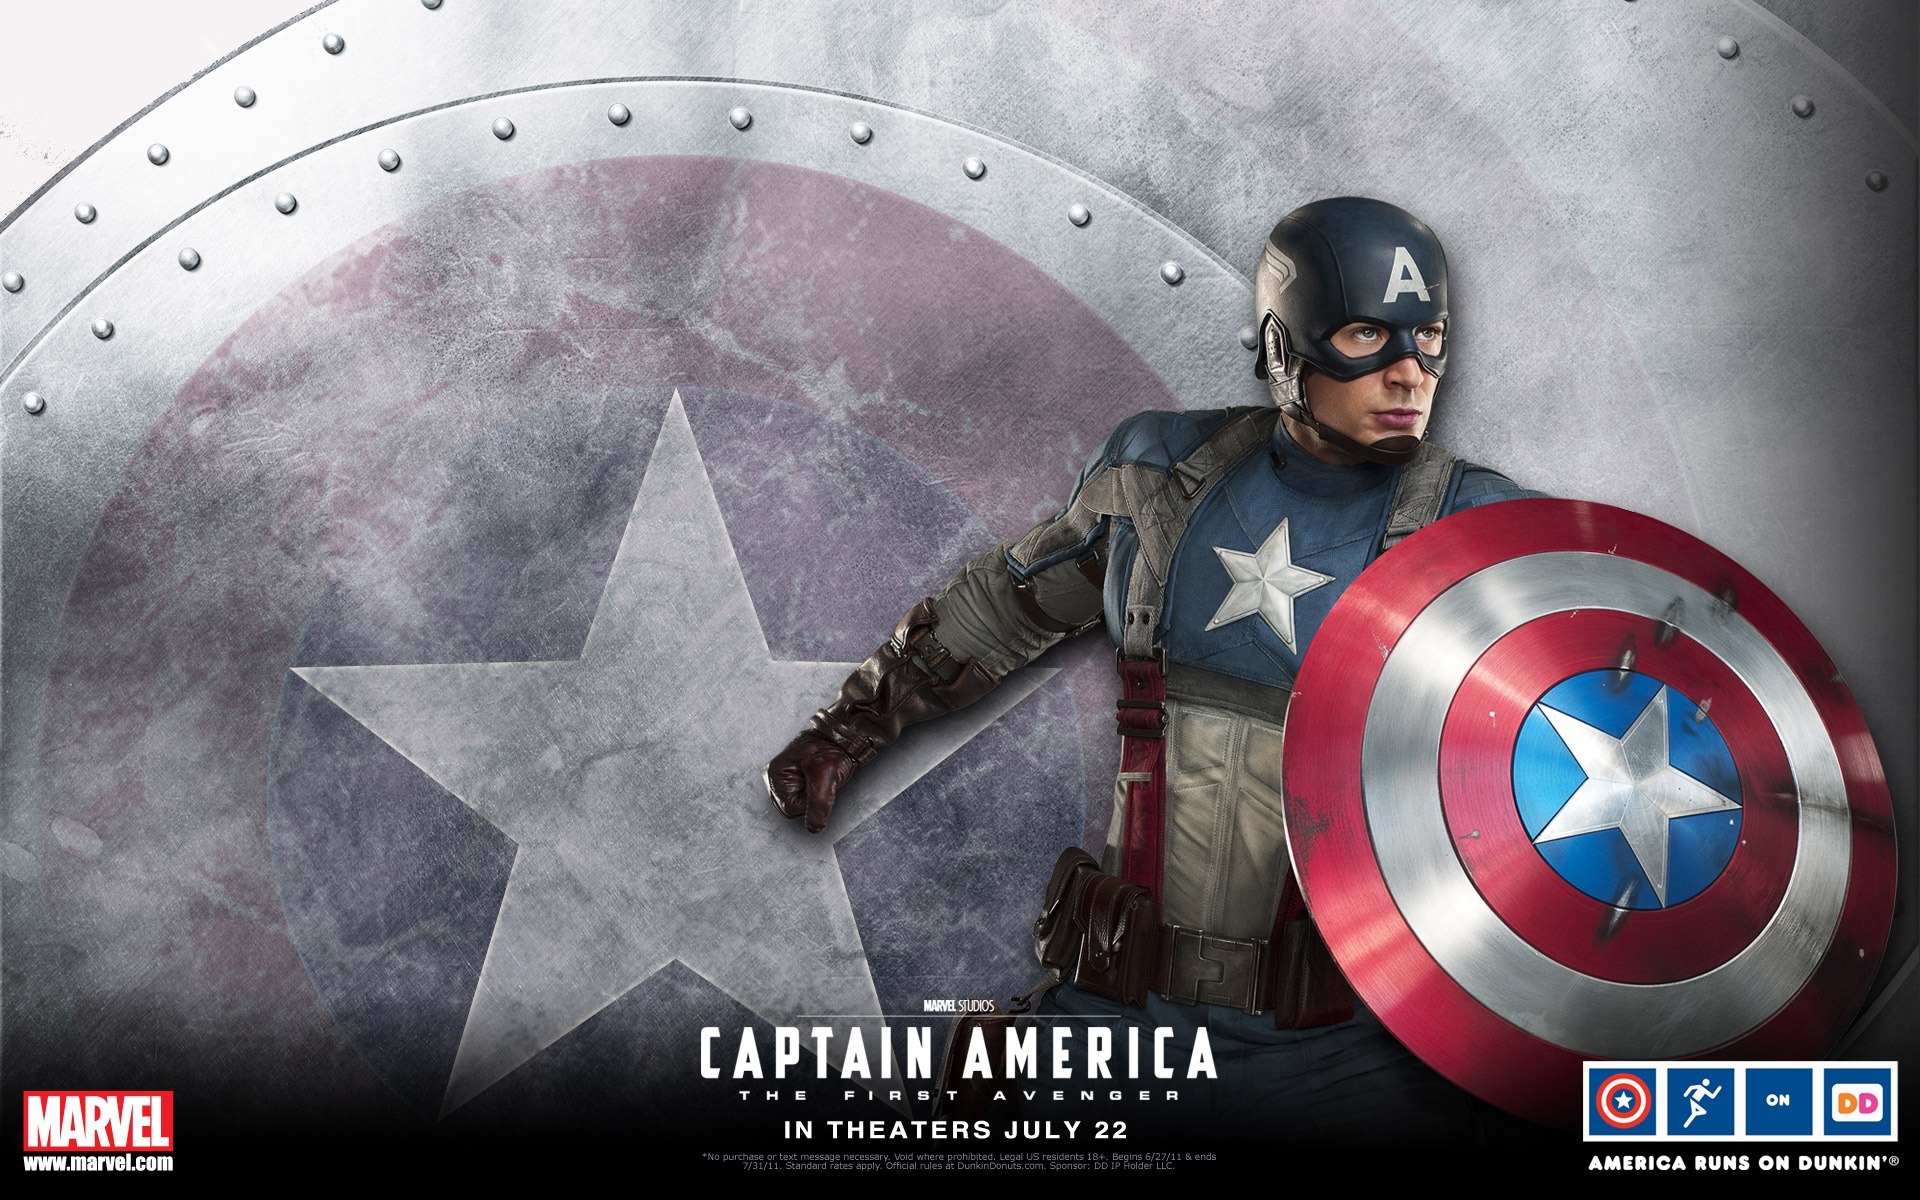 Captain America: The First Avenger wallpapers HD #6 - 1920x1200